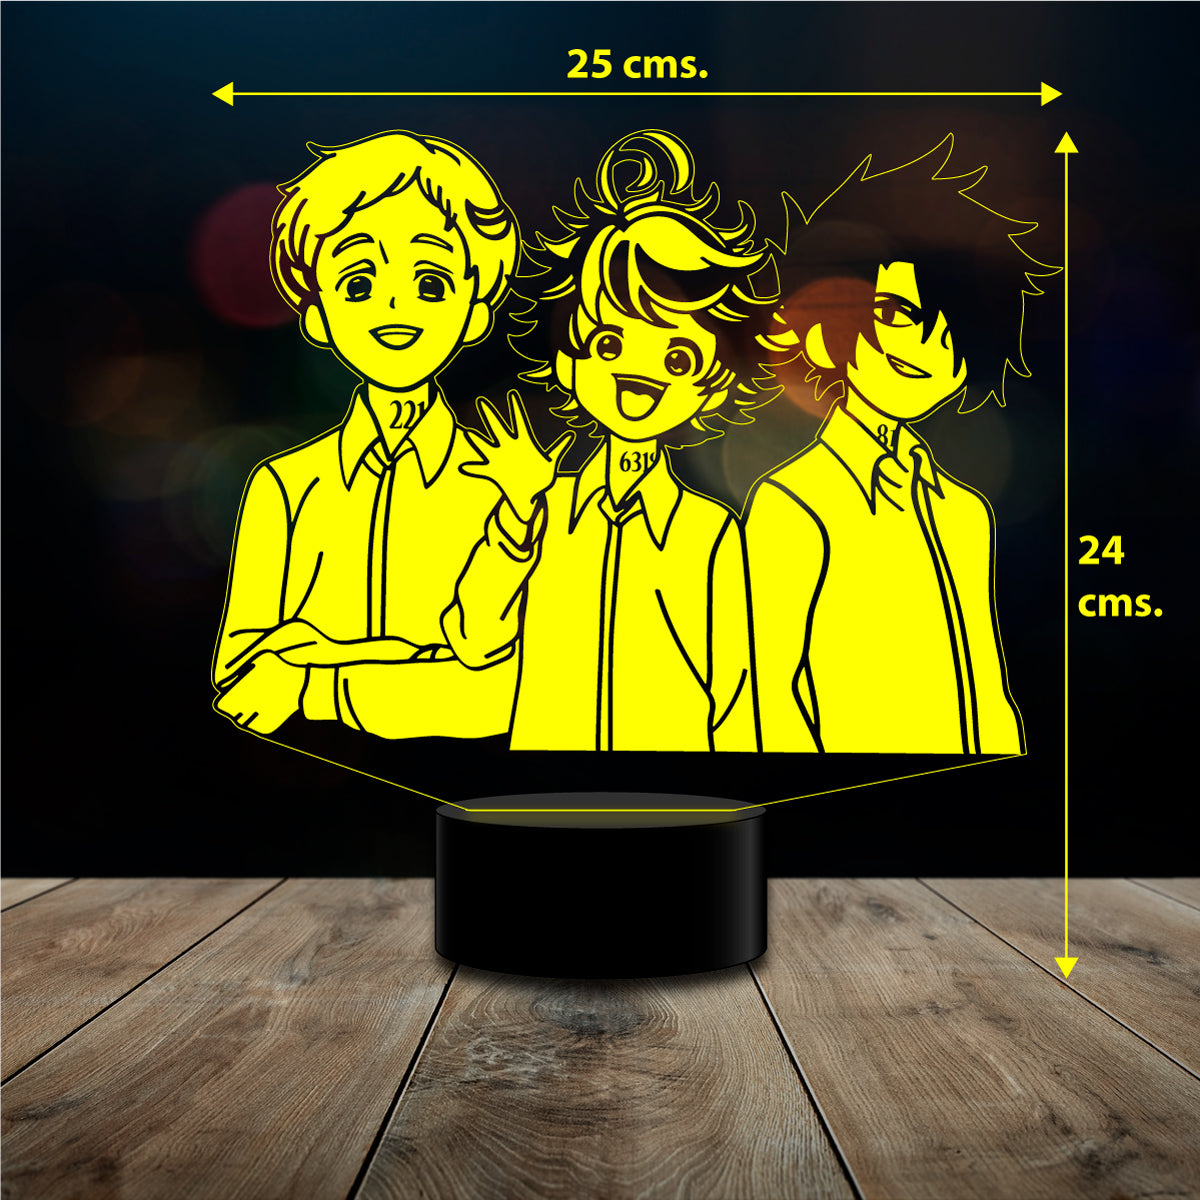 Lampara 3D The Promised Neverland control remoto